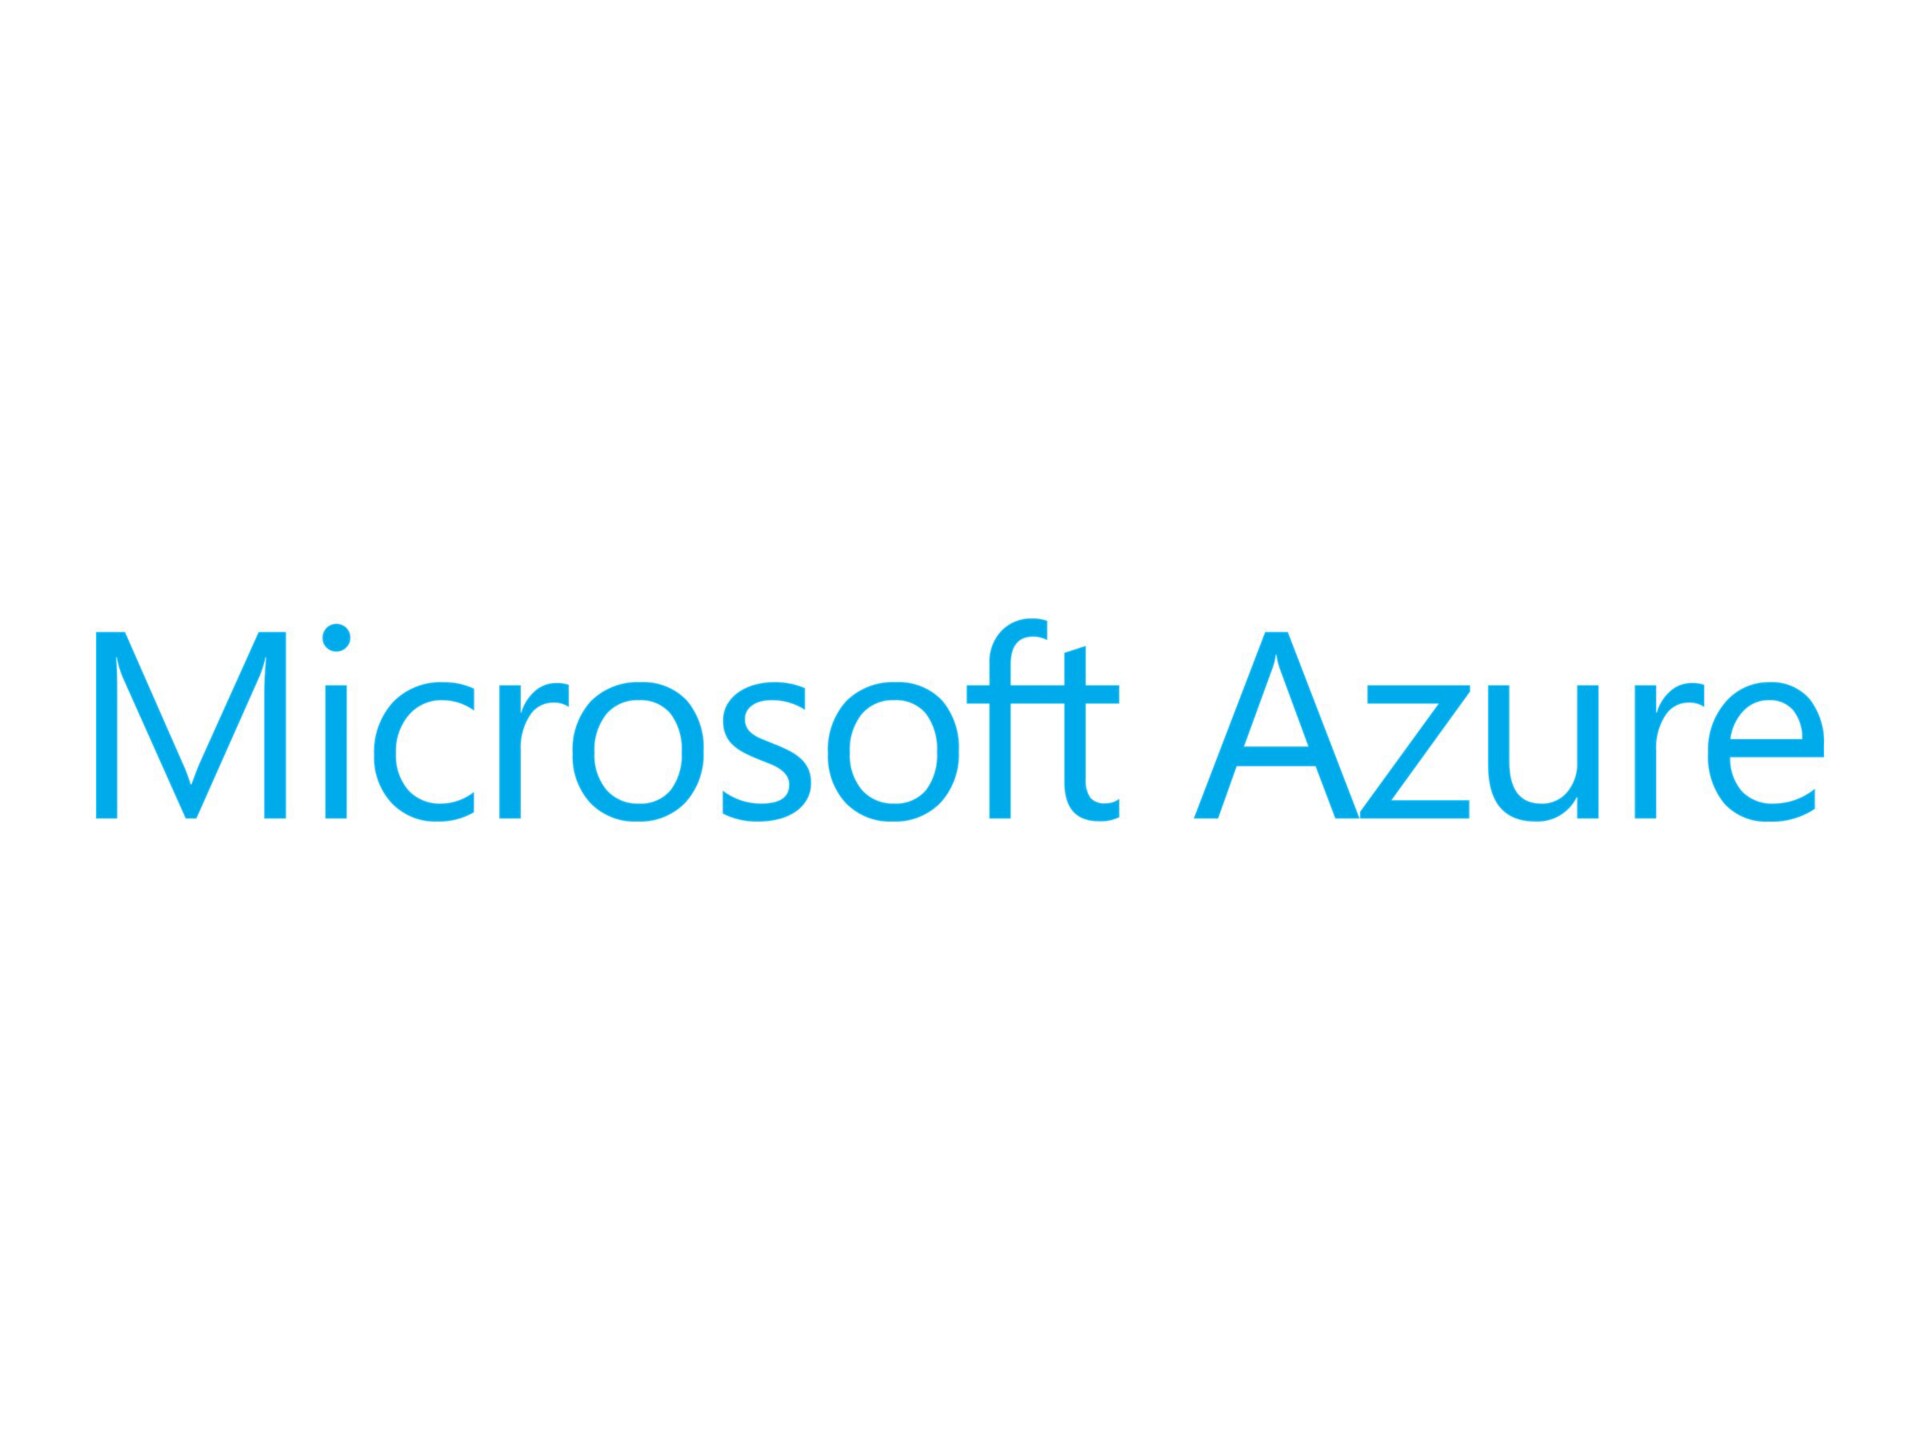 Microsoft Azure Monitor - fee - 100 GB capacity reservation per day